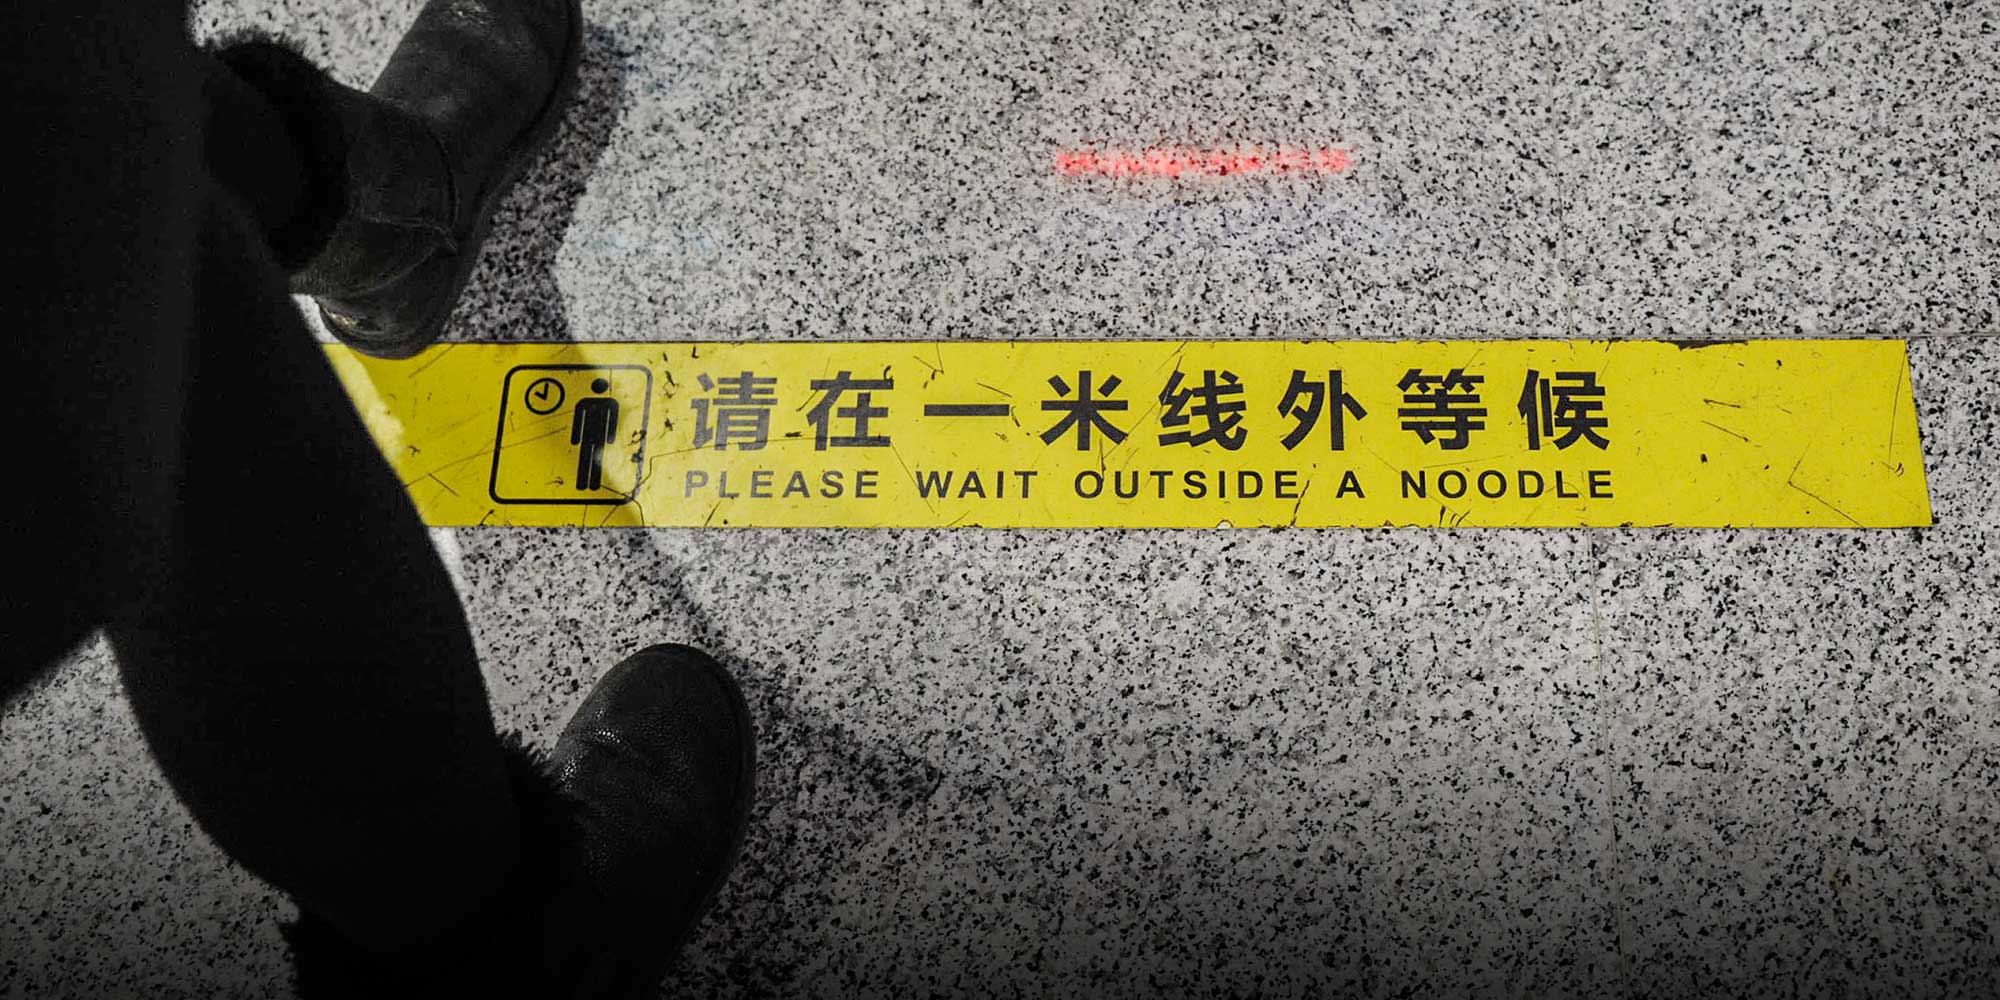 New 'Chinglish' Guide to Standardize Translation, Prevent Gaffes